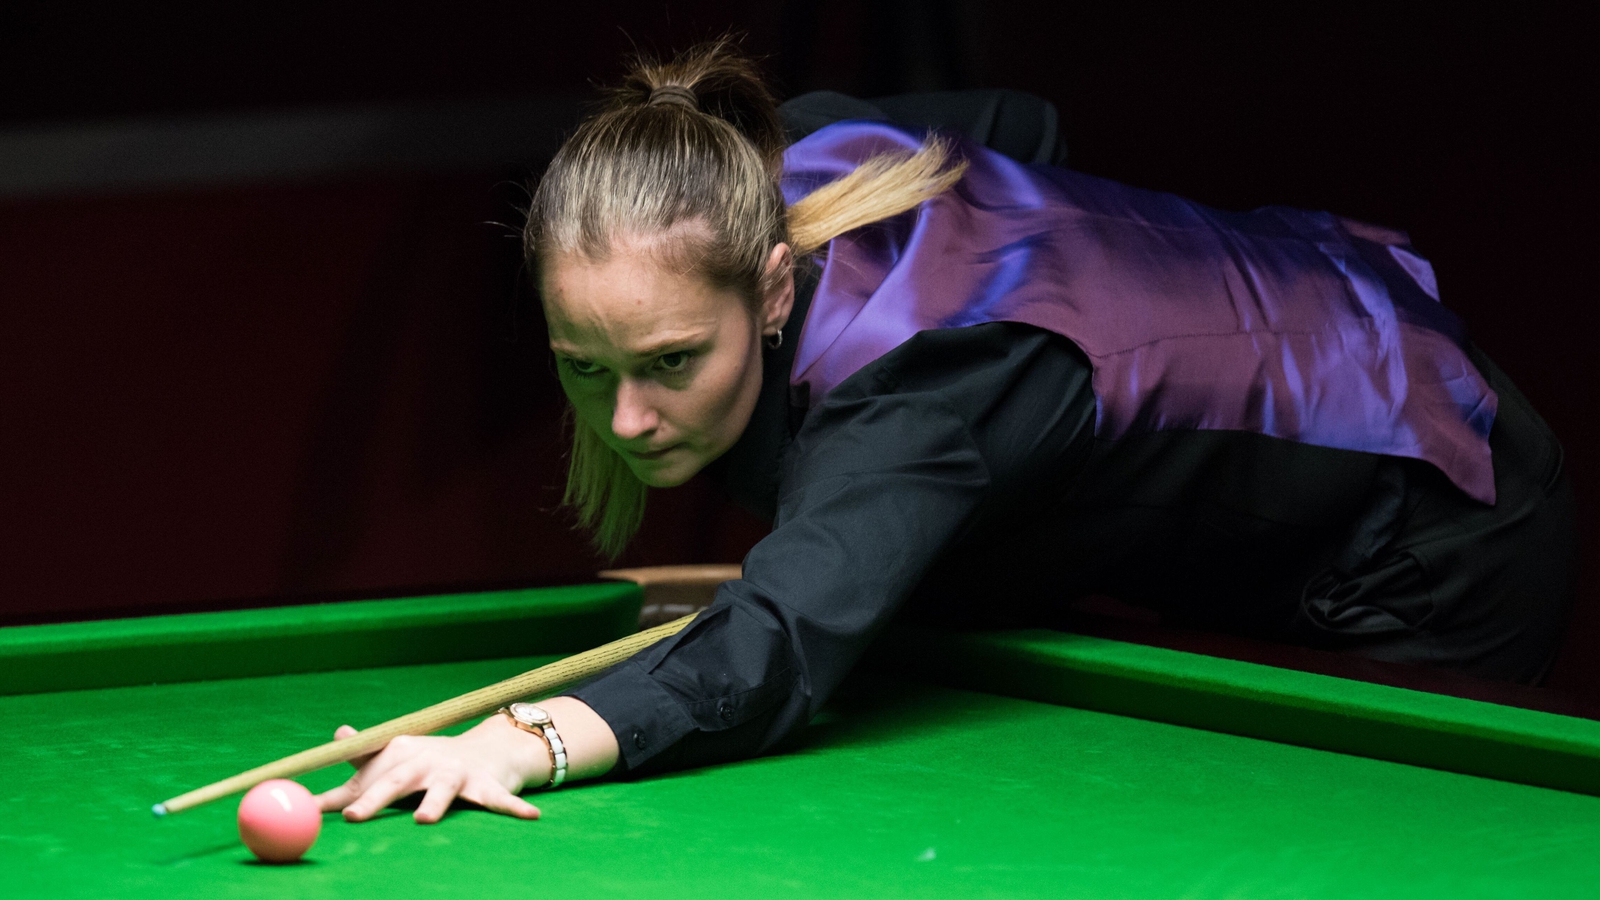 Snooker set to introduce mixed doubles competition